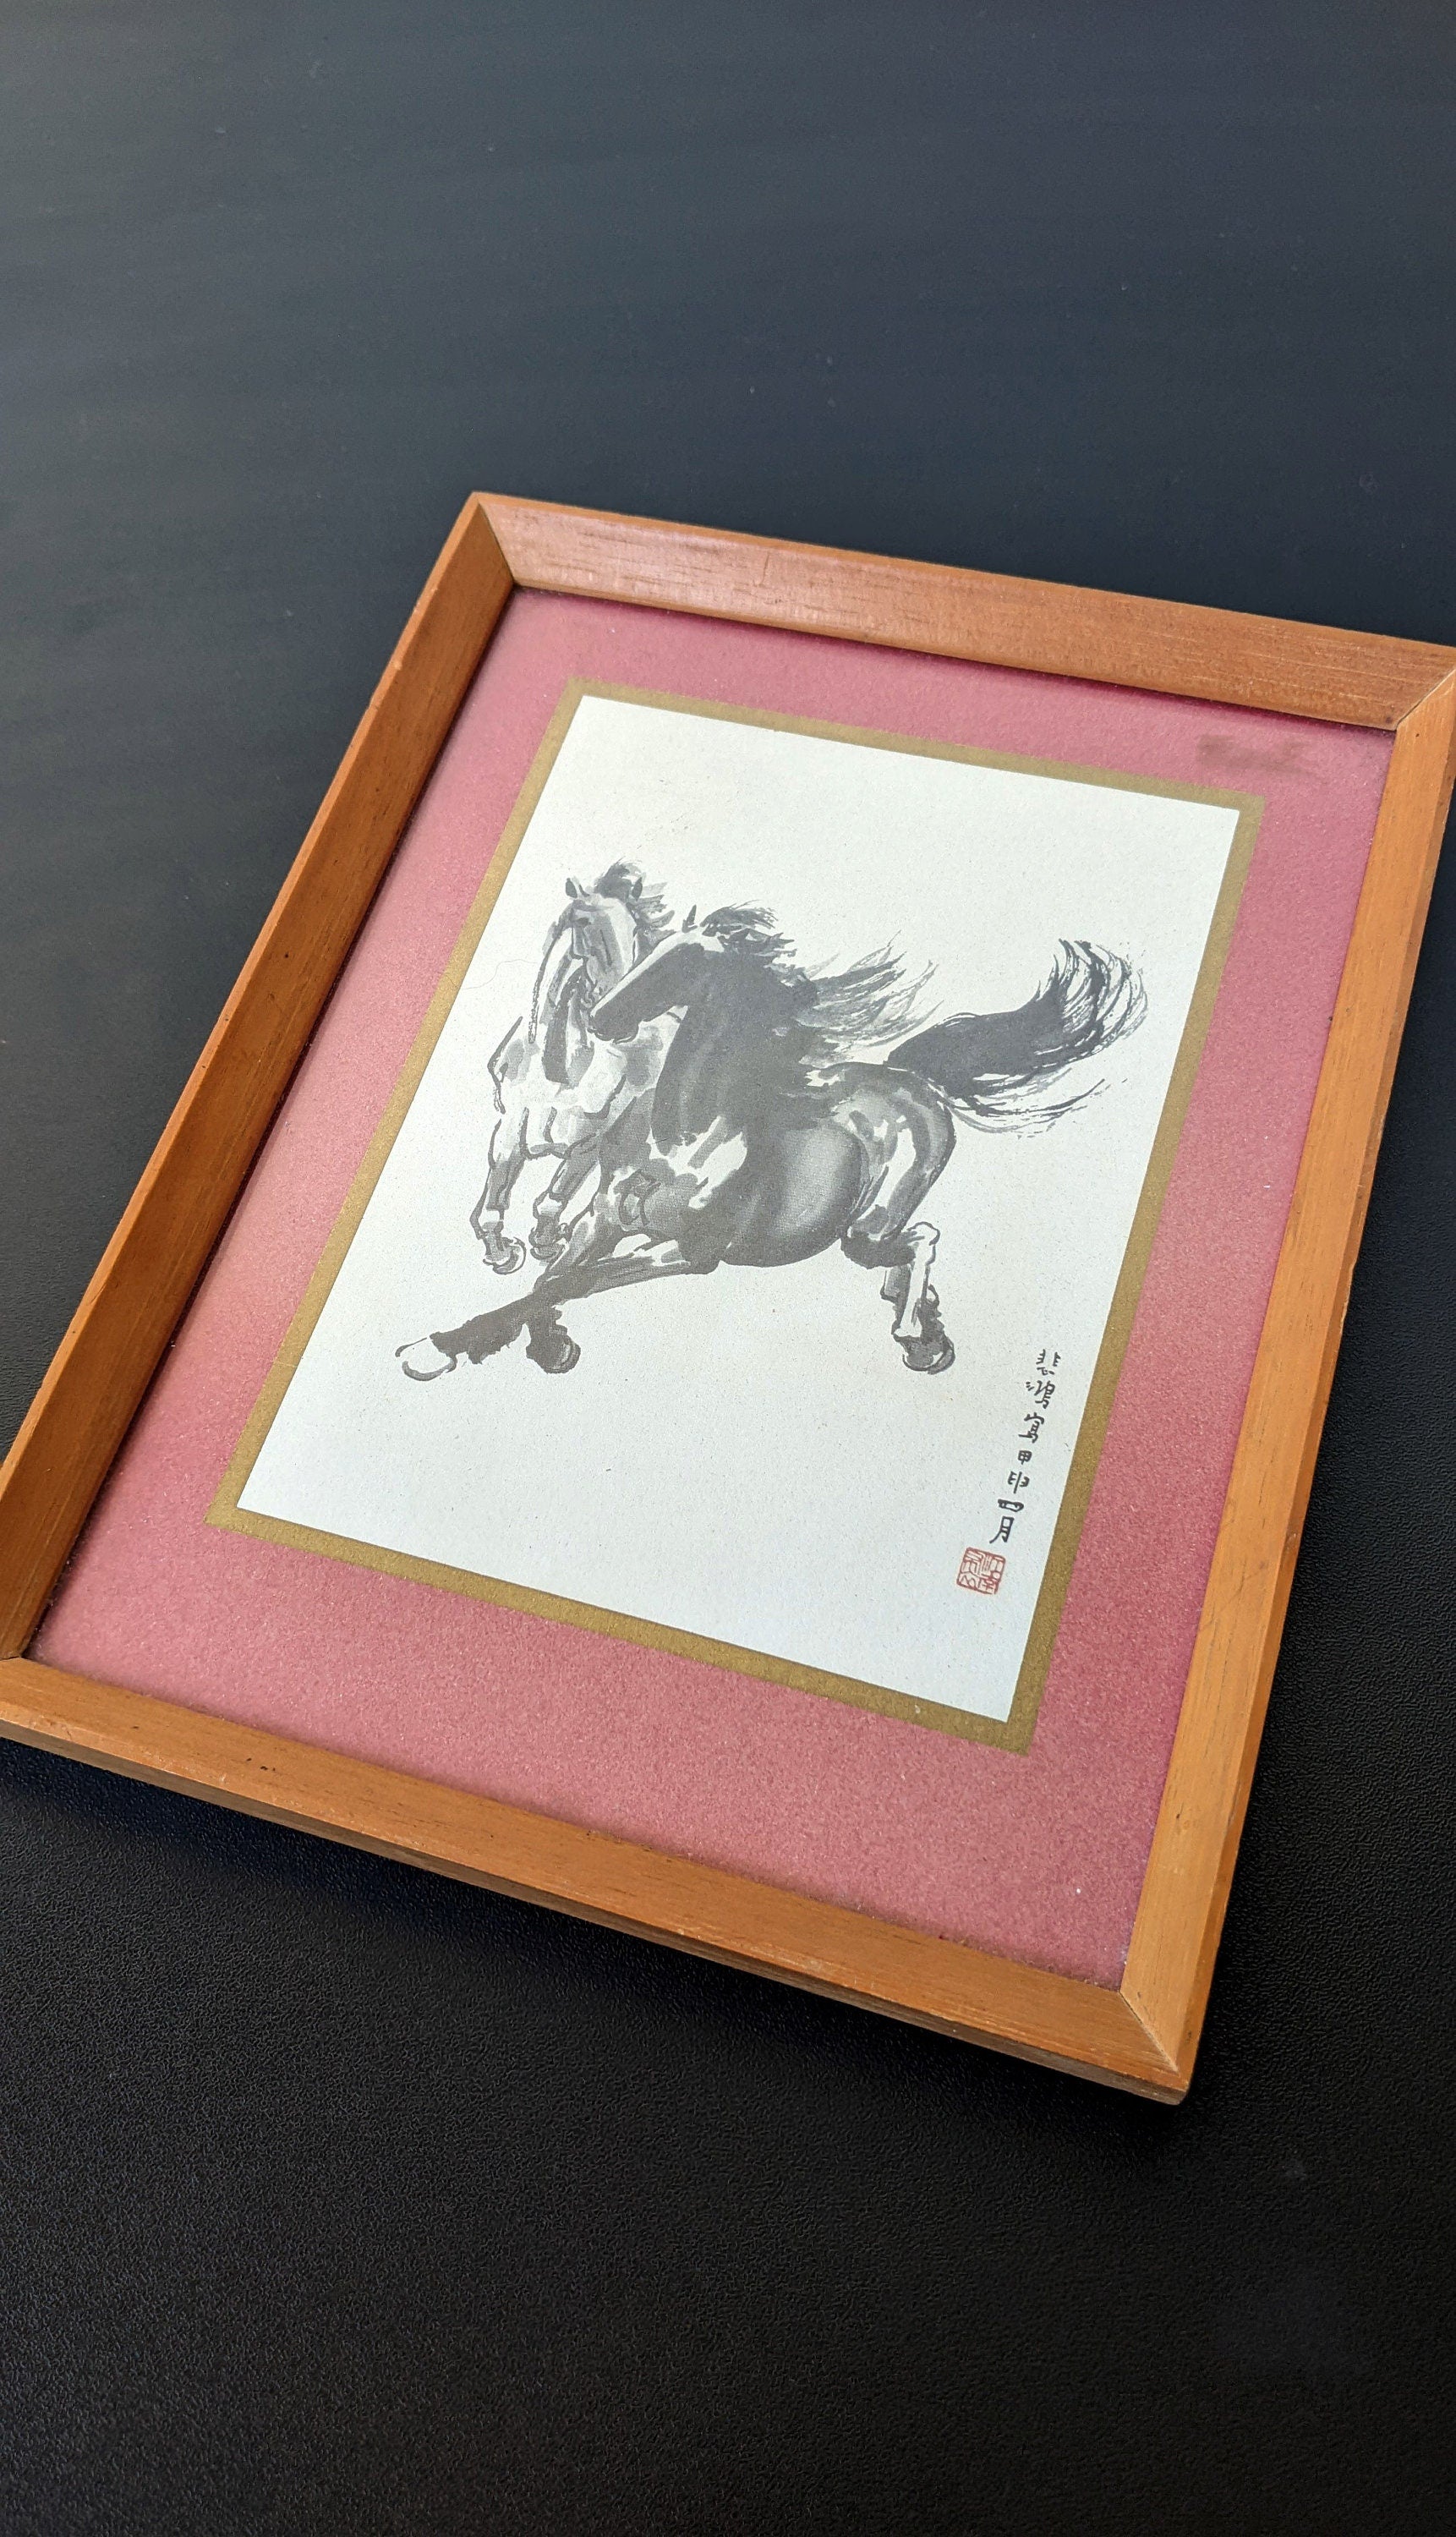 Two Galloping Horses by Xu Beihong, Mid Century Chinese Danqing Ink Wash Art